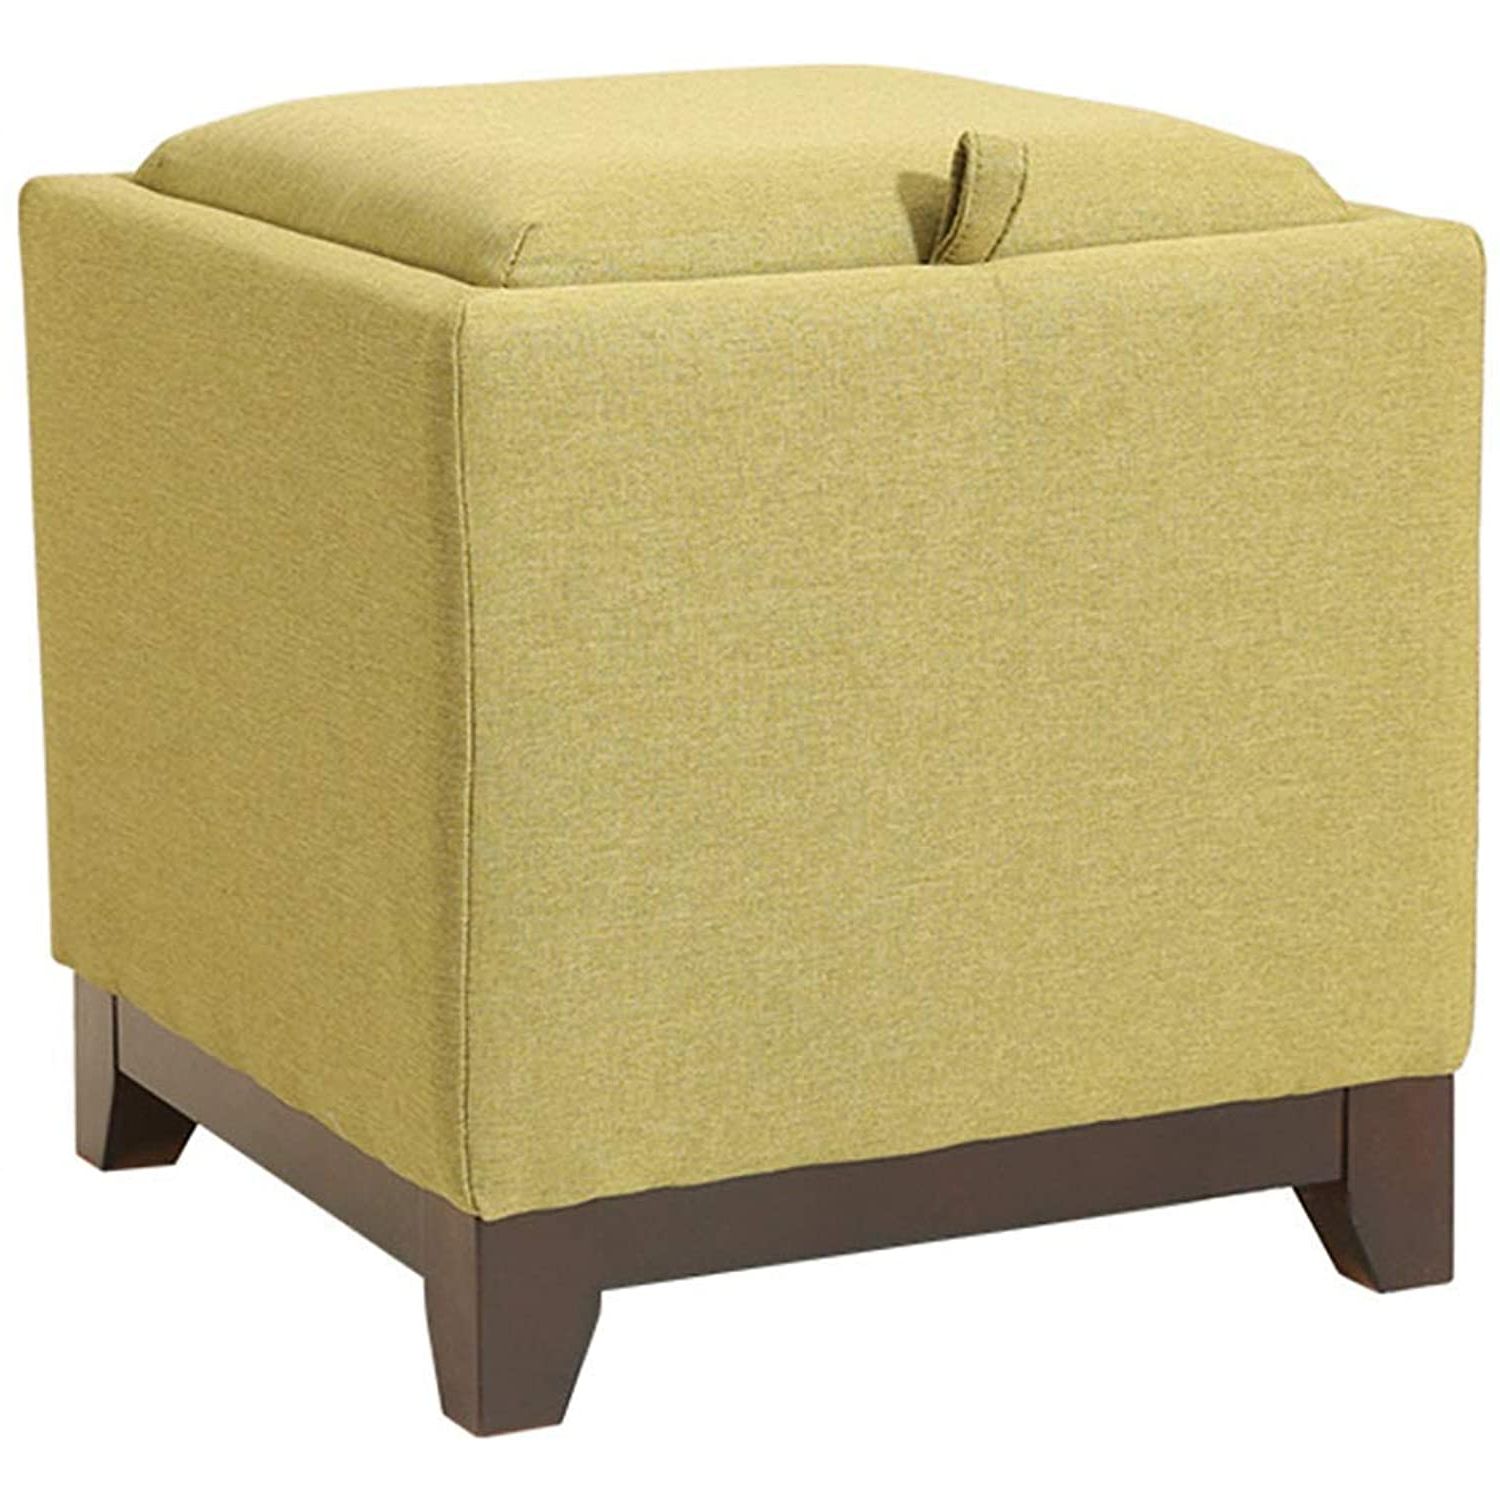 Preferred Green Fabric Square Storage Ottomans With Pillows Within Xbcdx Fabric Storage Tray Top Ottoman,square Cube Pouf Footrest Stool (View 7 of 10)